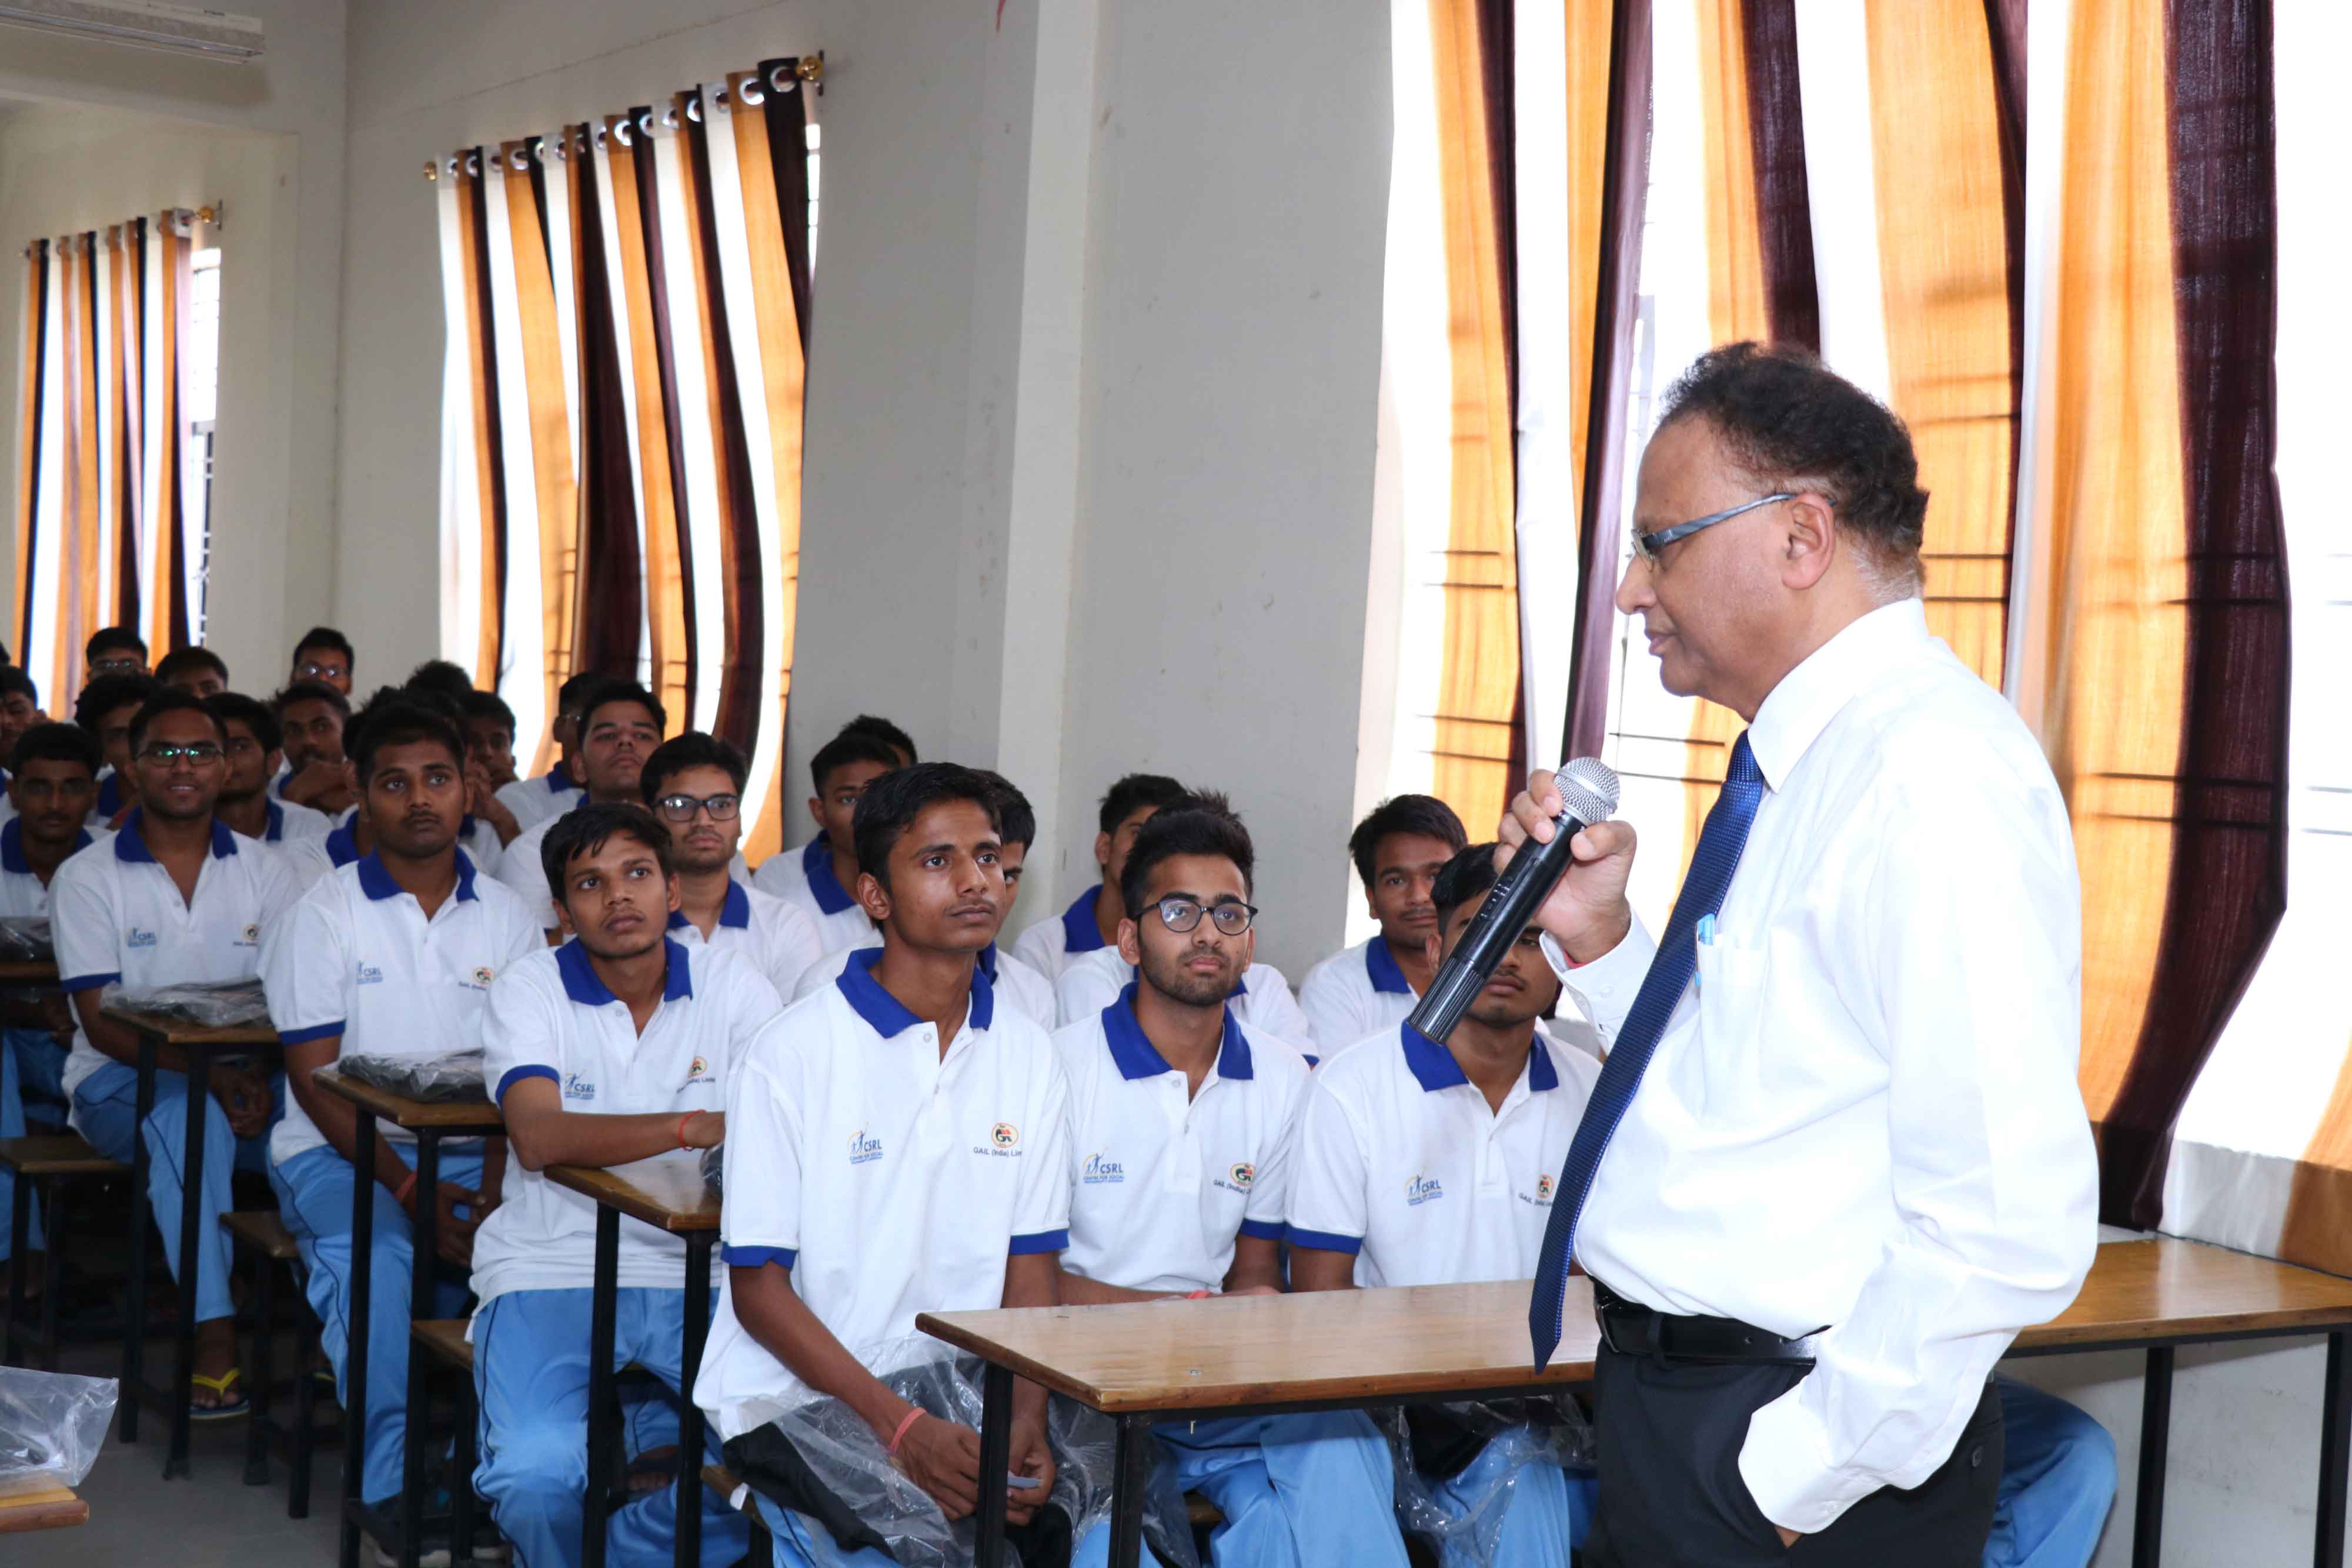 Director-(HR)-interacting-with-students